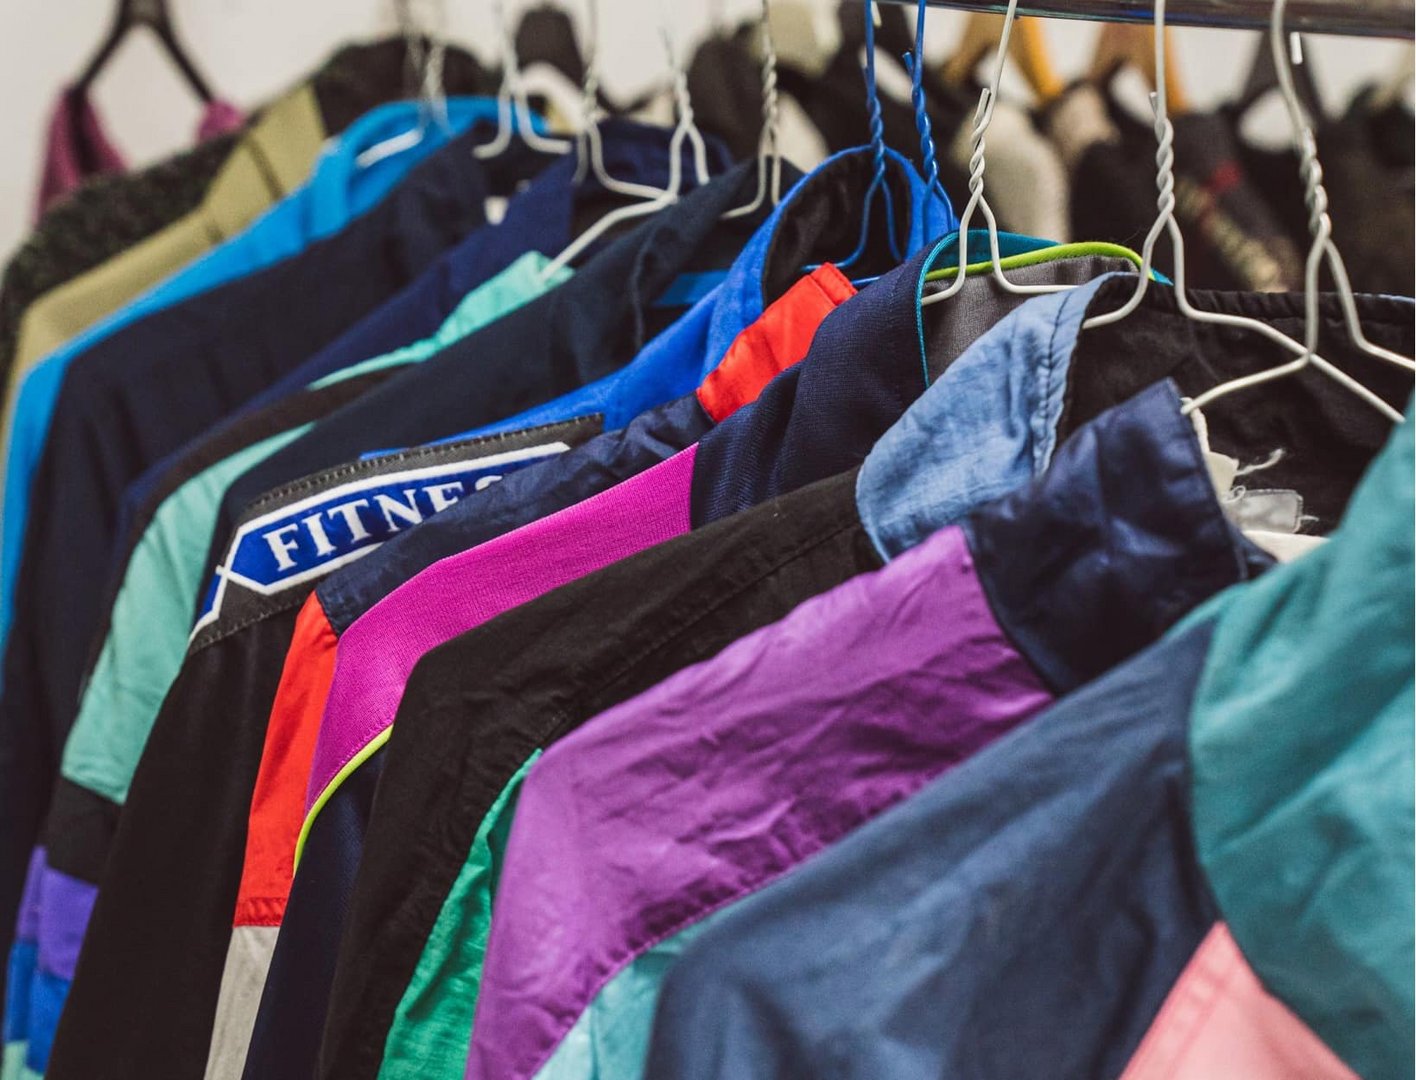 The World's Obsession With Clothing Hauls Is Harming the Planet